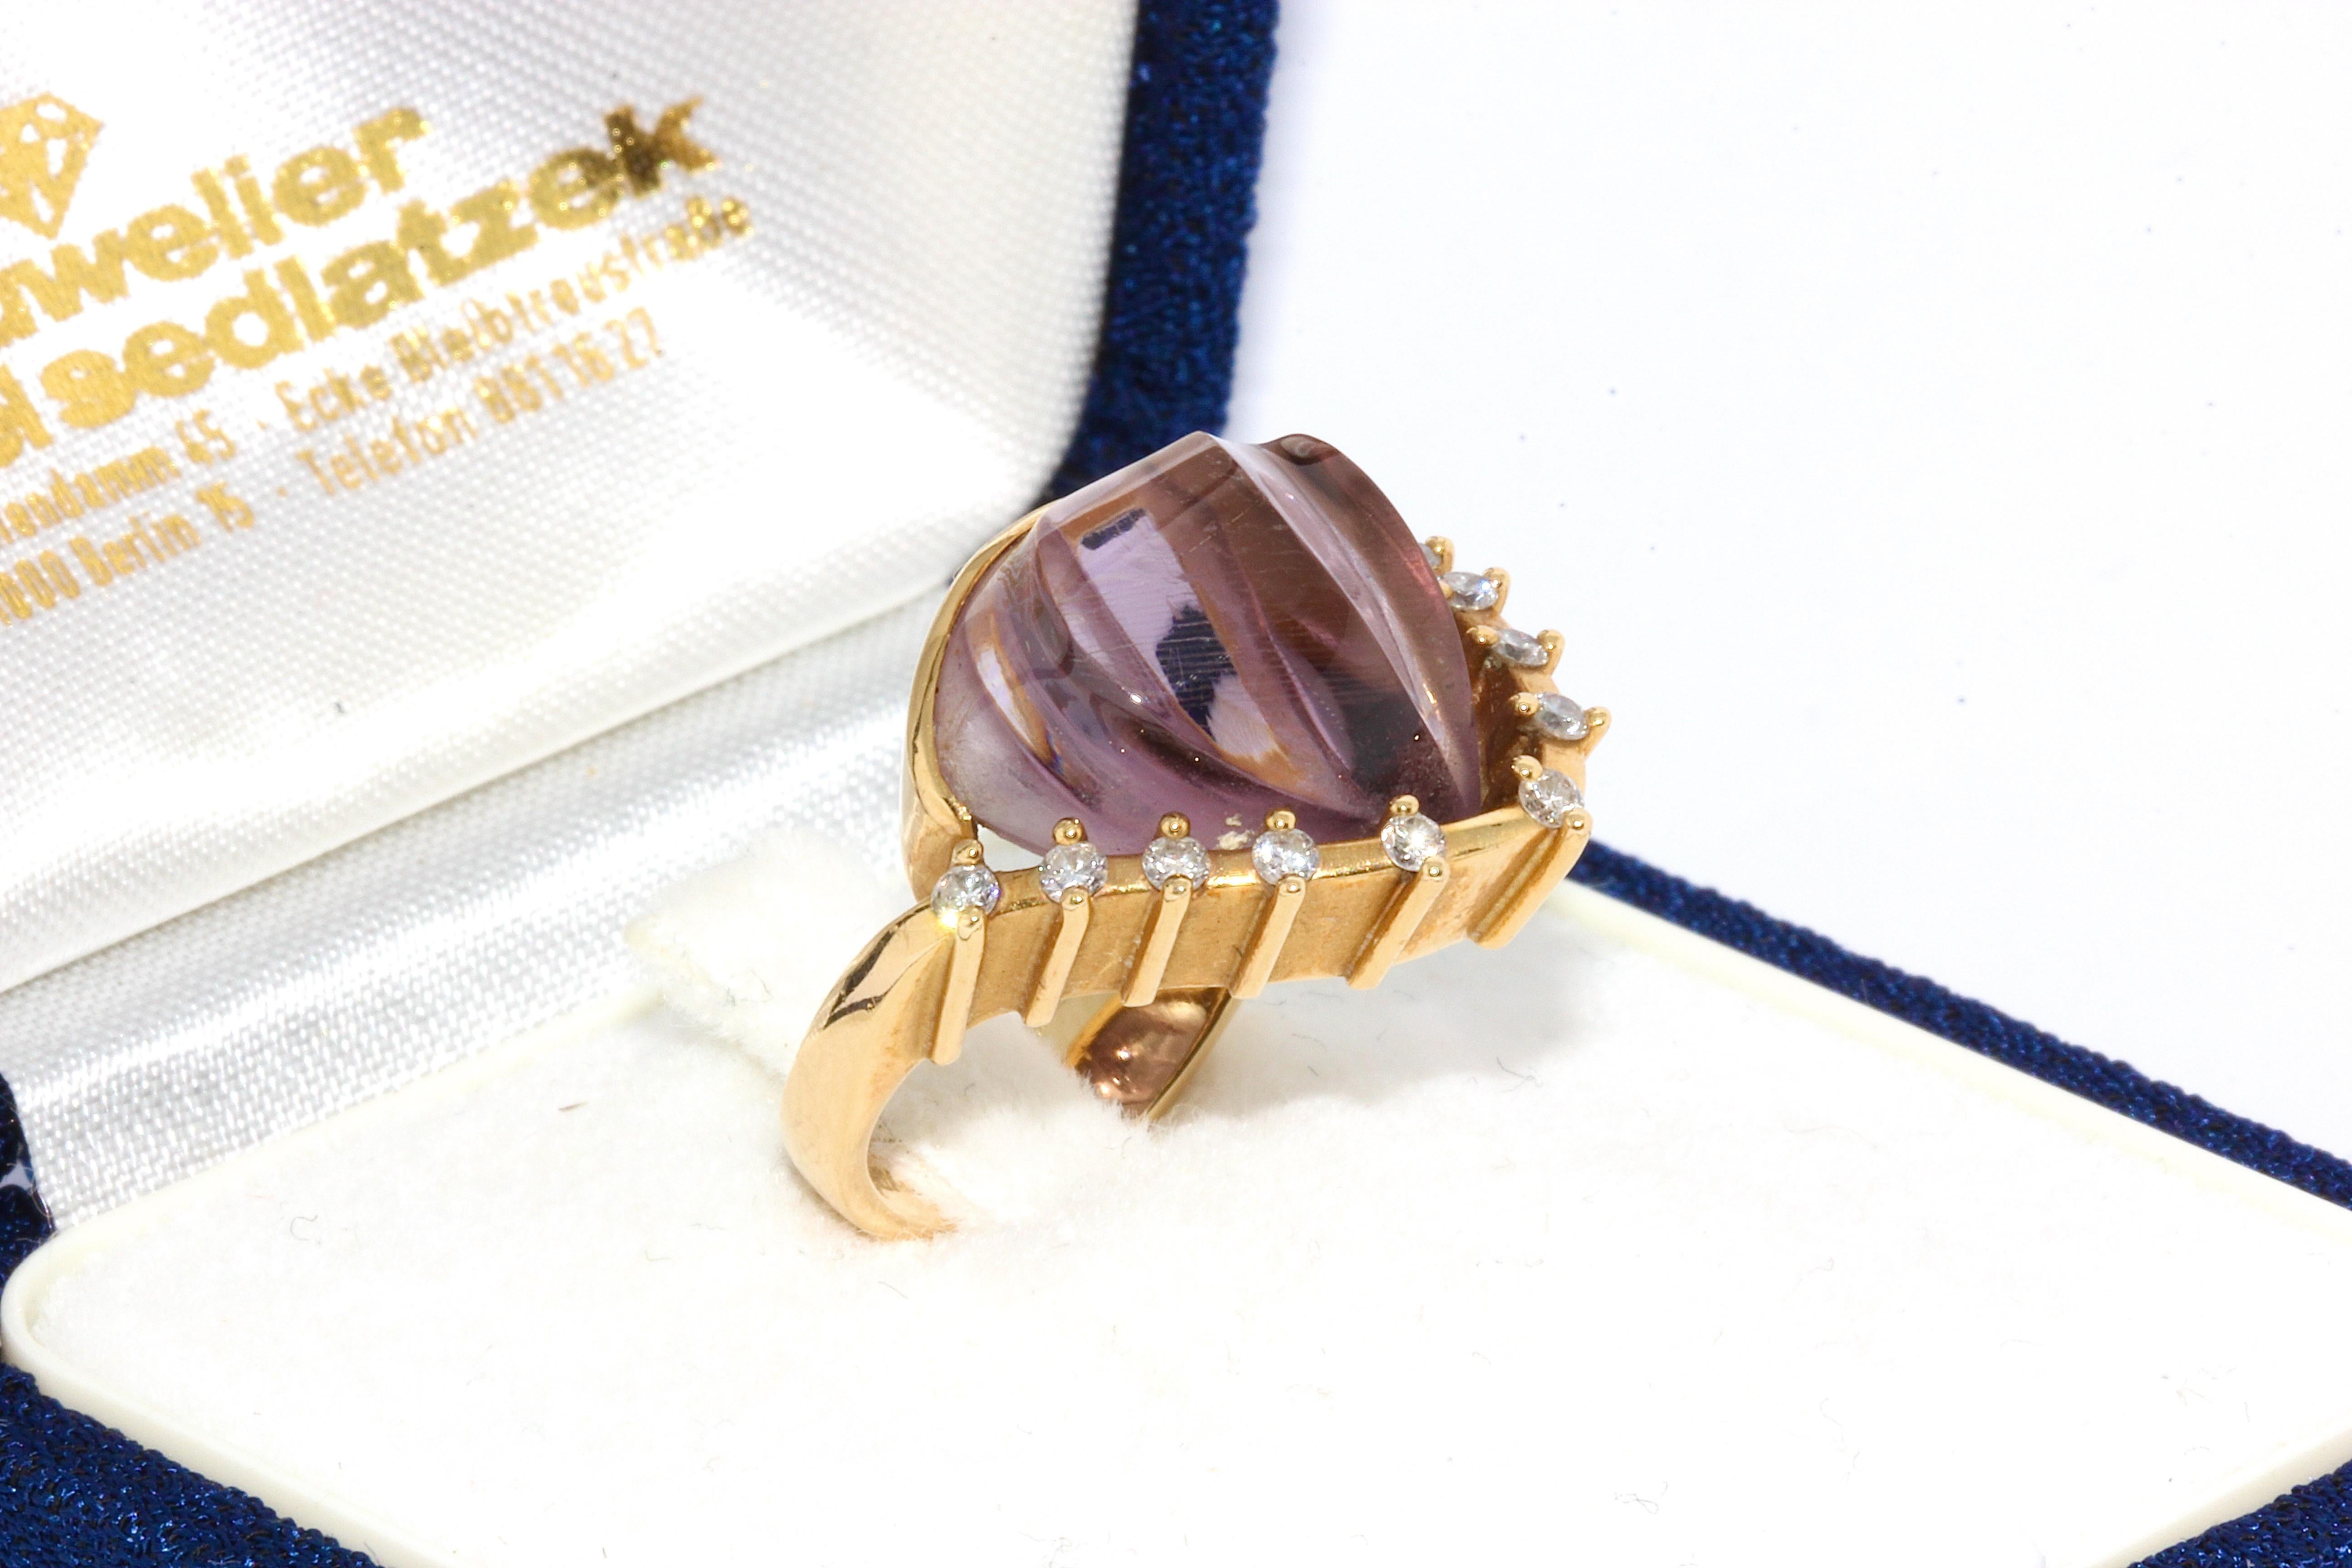 Enchanting 18 karat gold ring set with large amethyst and diamonds.
By famous jewelry designer Cadeaux.

18 karat yellow gold, hallmarked
Large, elegantly cut amethyst (shell-shaped)
Set with 10 small diamonds

Including certificate of